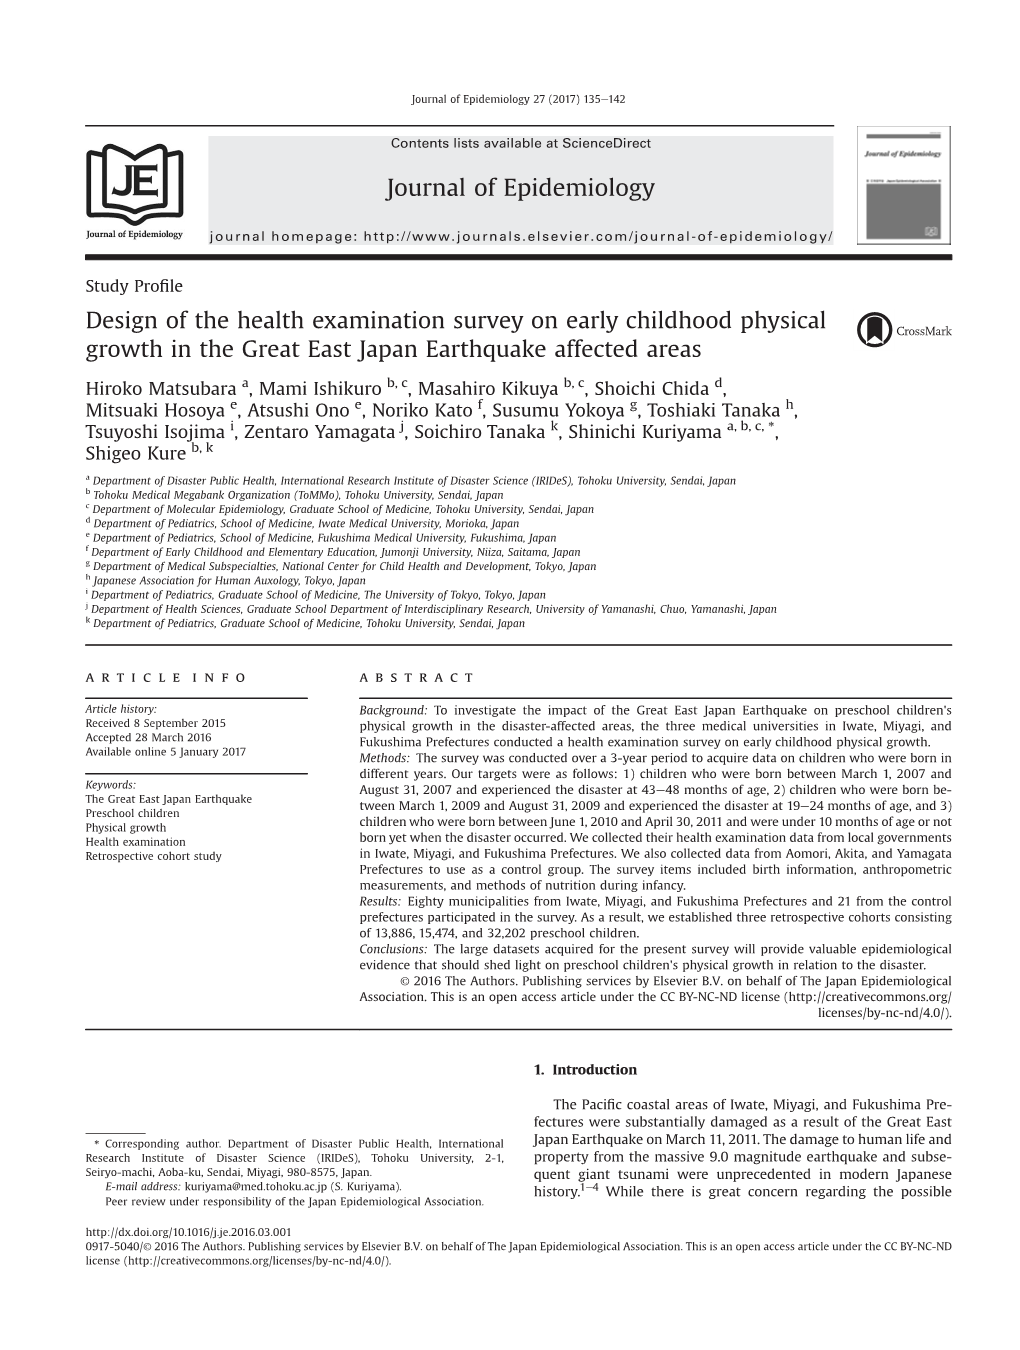 Design of the Health Examination Survey on Early Childhood Physical Growth in the Great East Japan Earthquake Affected Areas